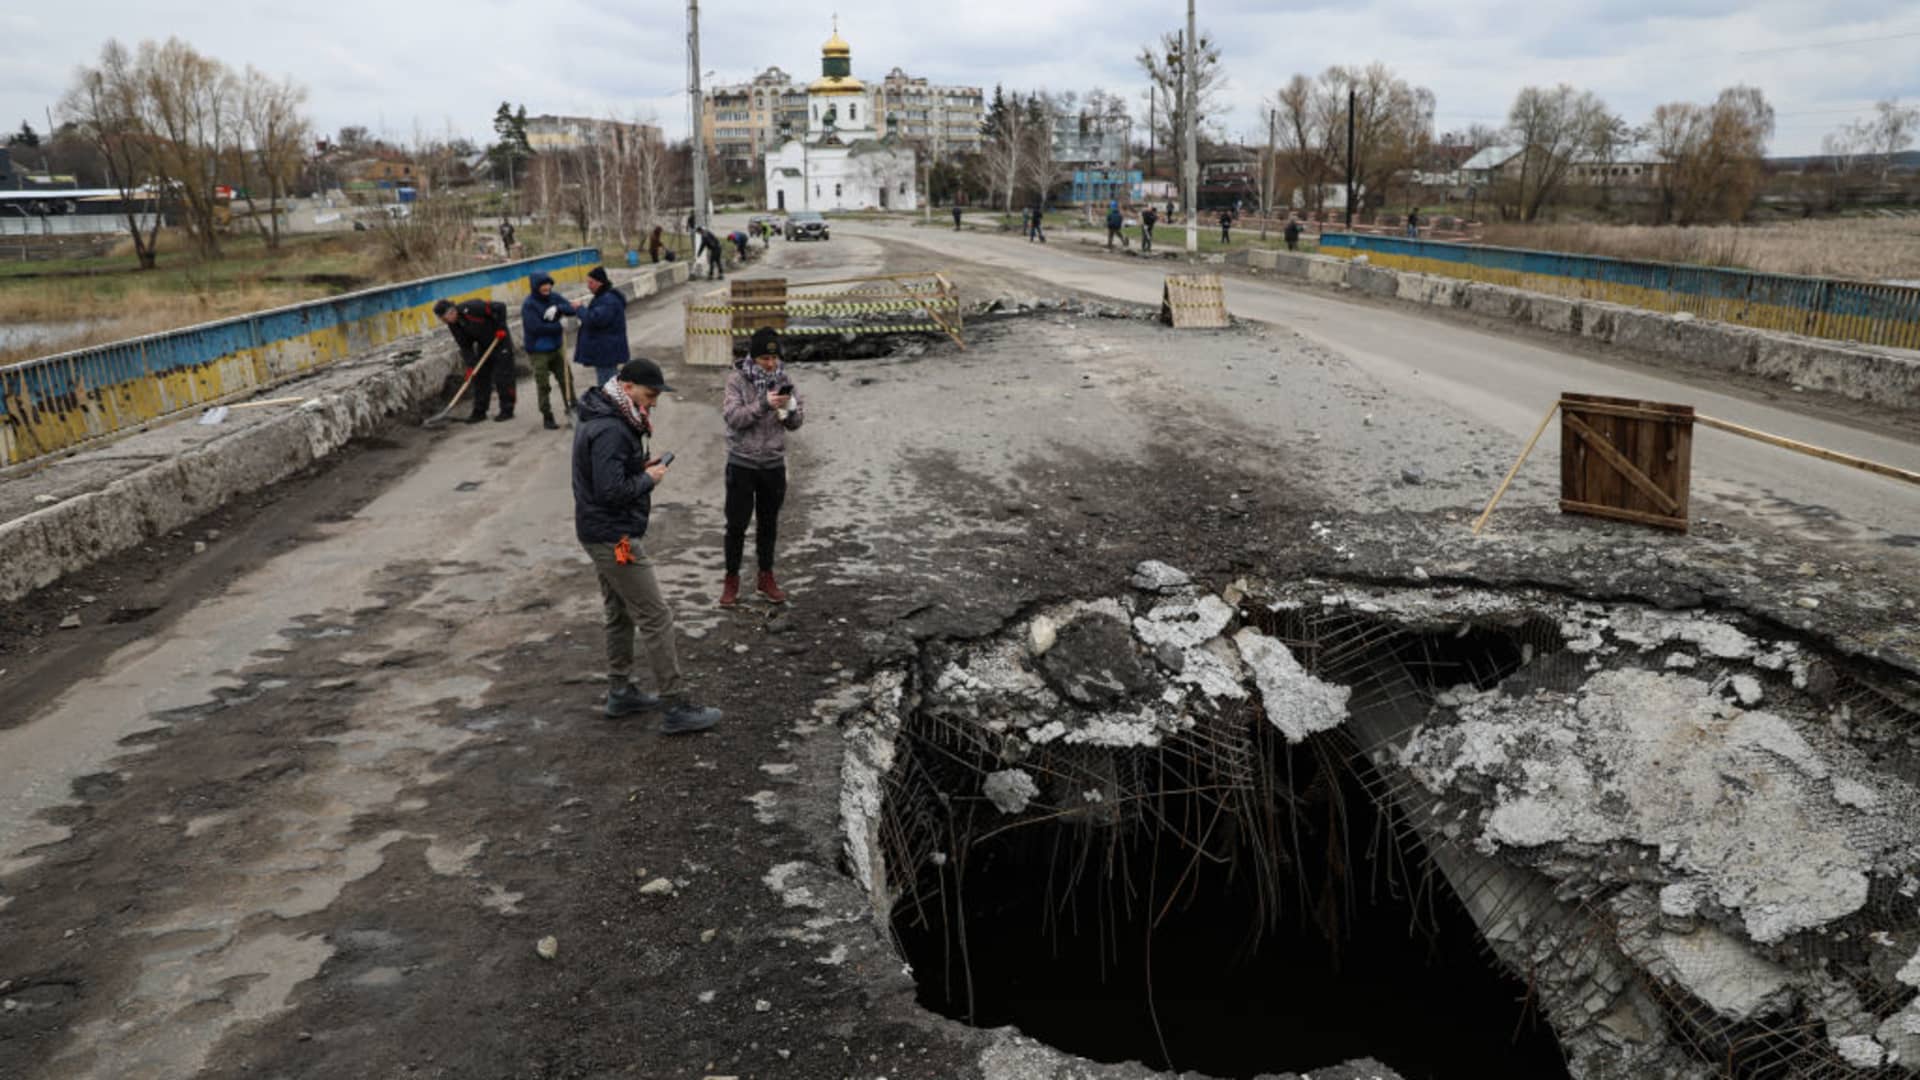 A roadway damaged by Russian forces in the Makariv region near Kyiv on April 10, 2022.